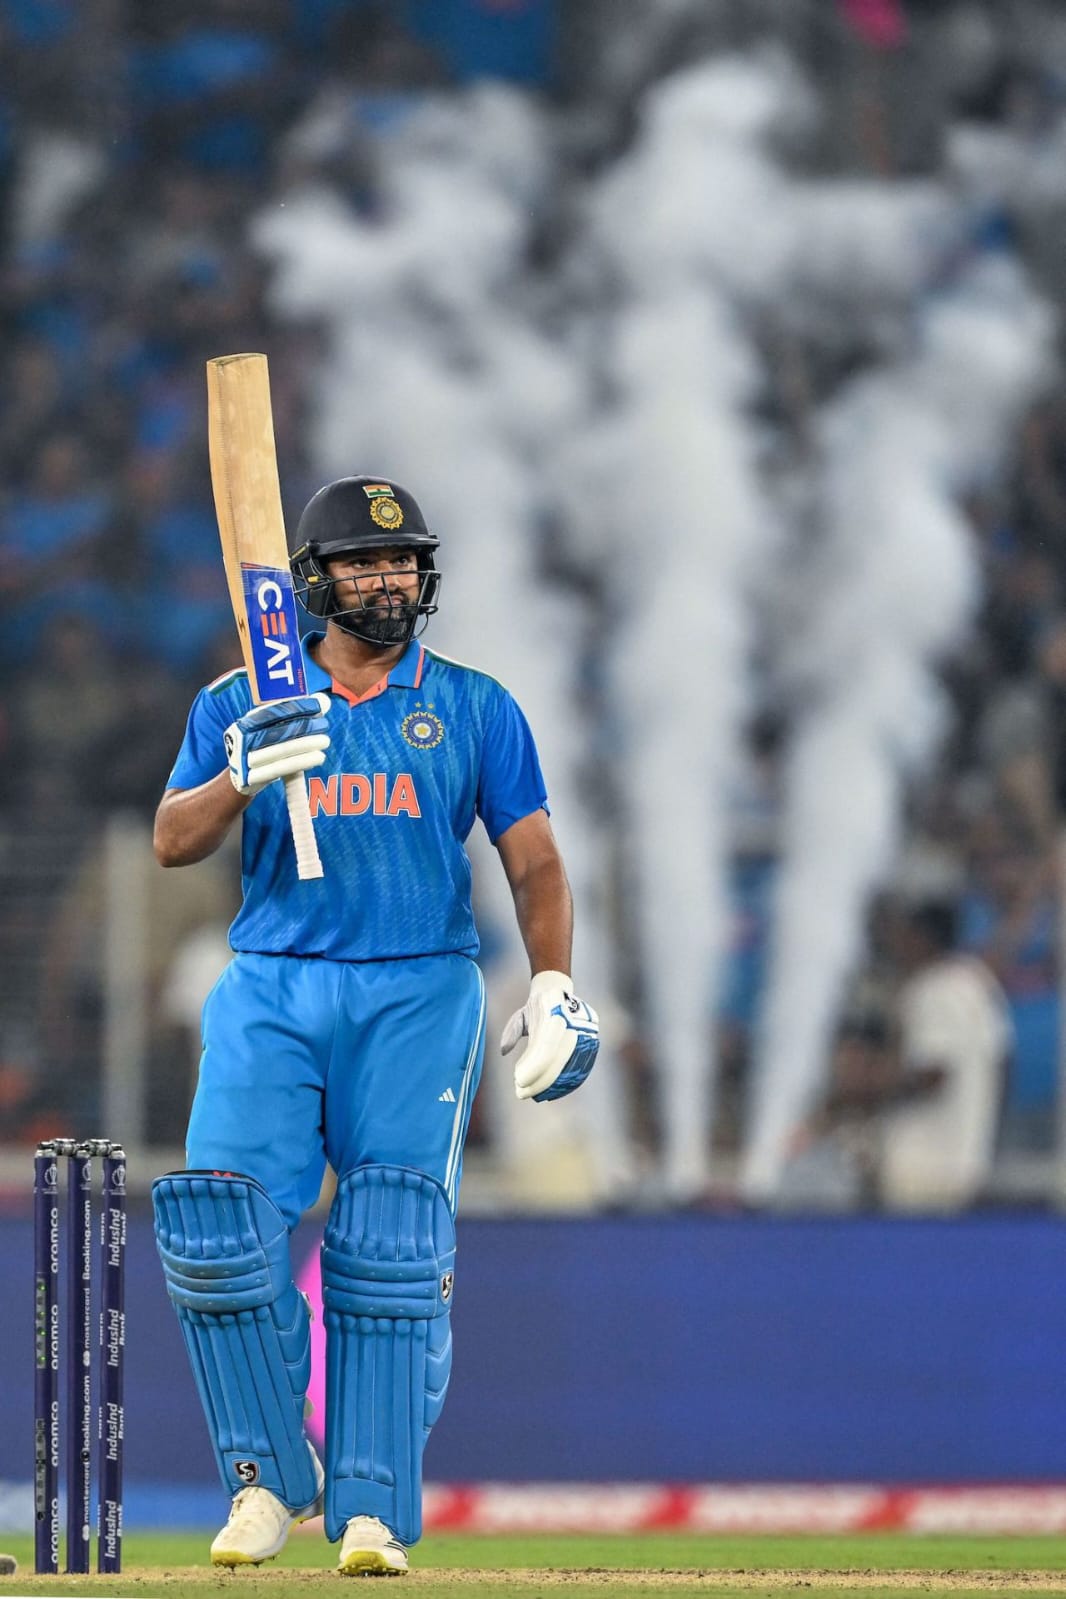 Indian Captain Rohit Sharma Has been in Red-Hot Form In the World Cup. Pic Credits-X